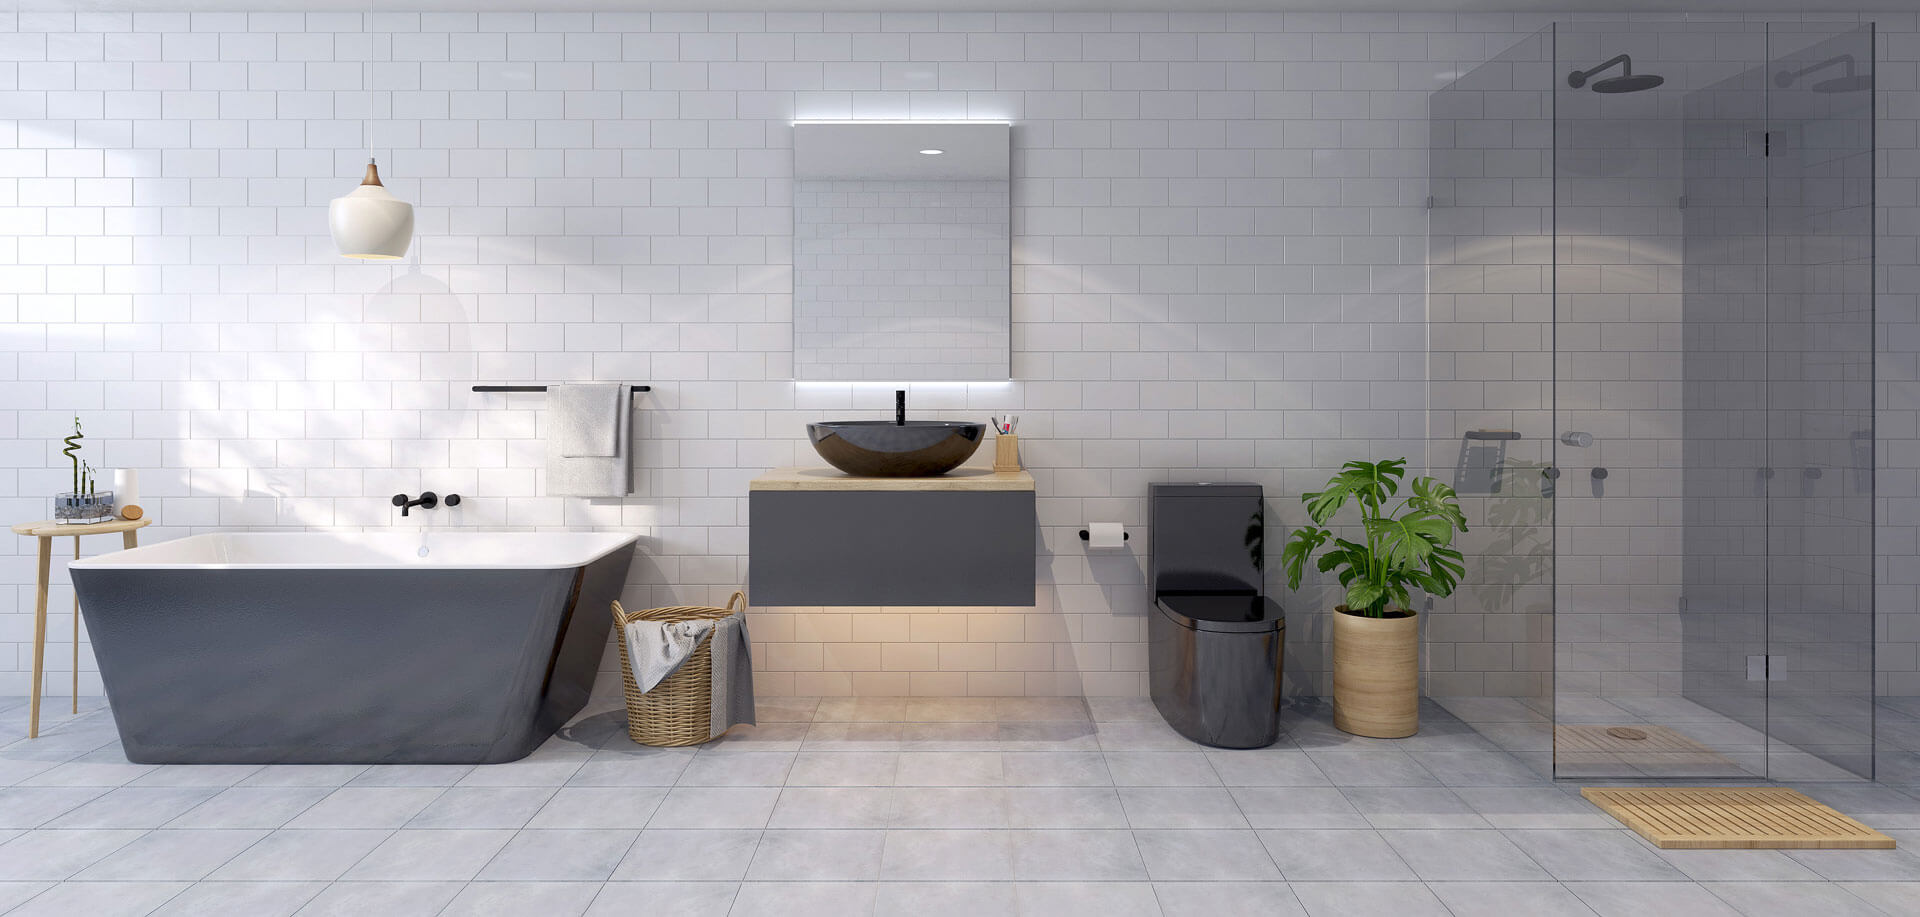 Designing a Bathroom for Your Growing Family: Practical Tips and Ideas